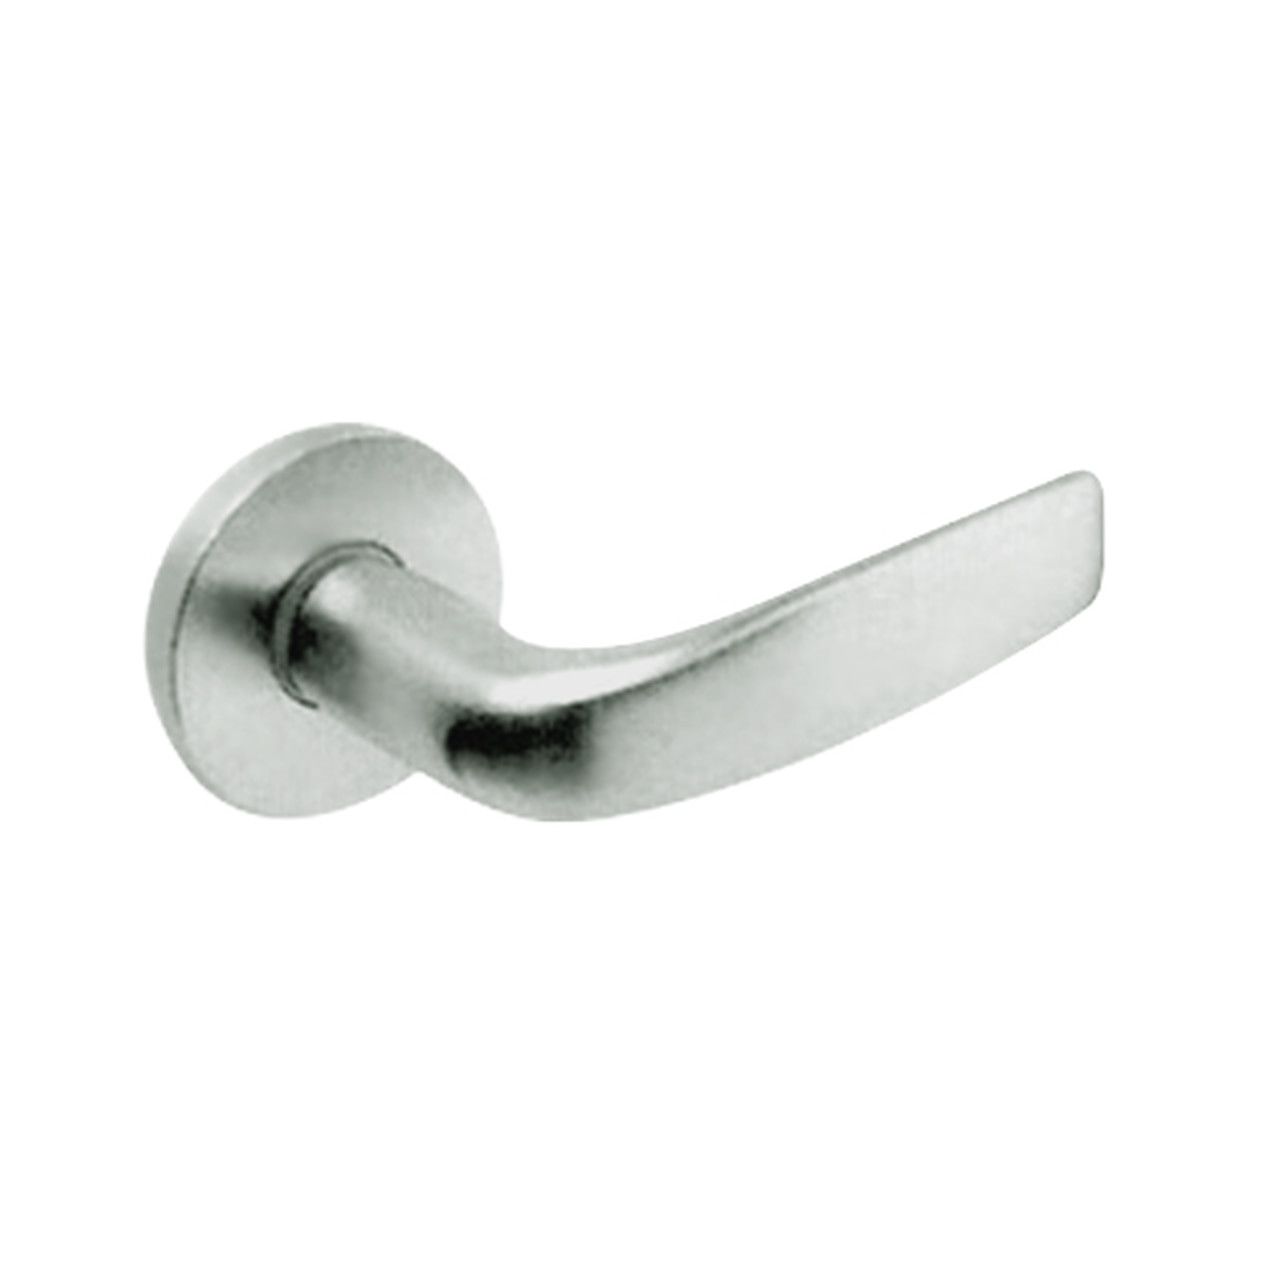 ML2053-CSF-619-LC Corbin Russwin ML2000 Series Mortise Entrance Locksets with Citation Lever in Satin Nickel